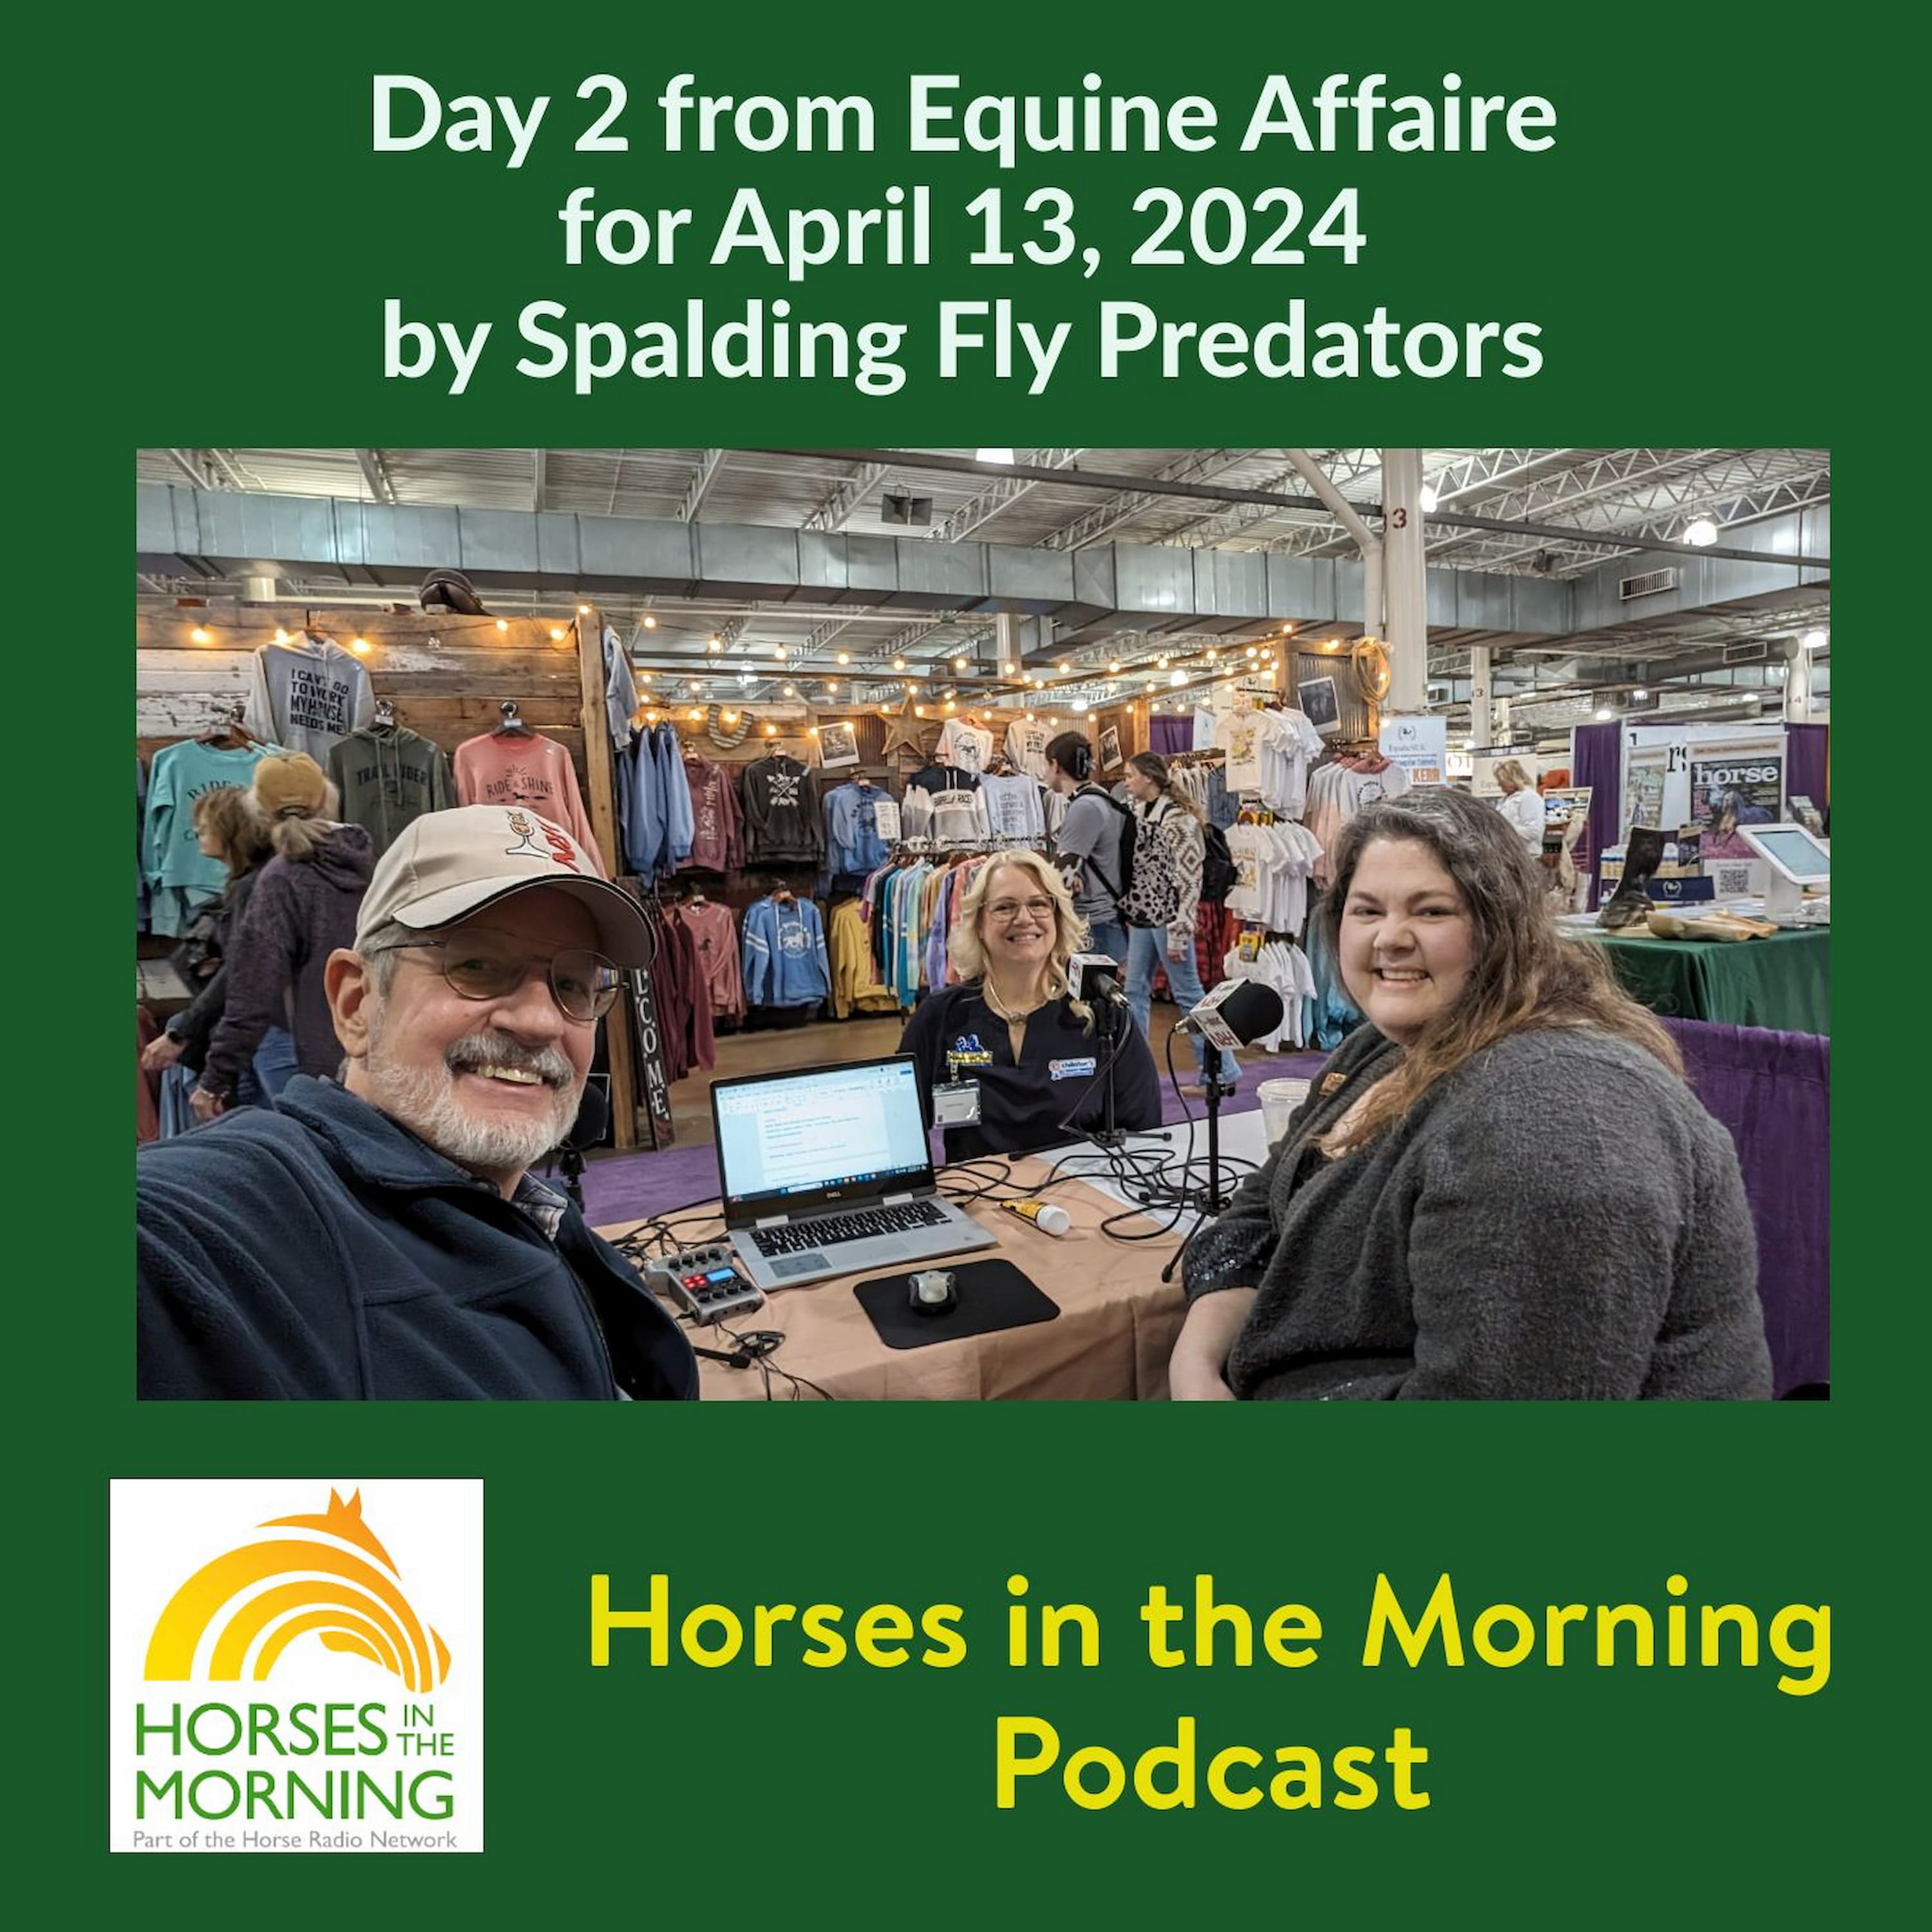 Day 2 from Equine Affaire for April 13, 2024 by Spalding Fly Predators - HORSES IN THE MORNING